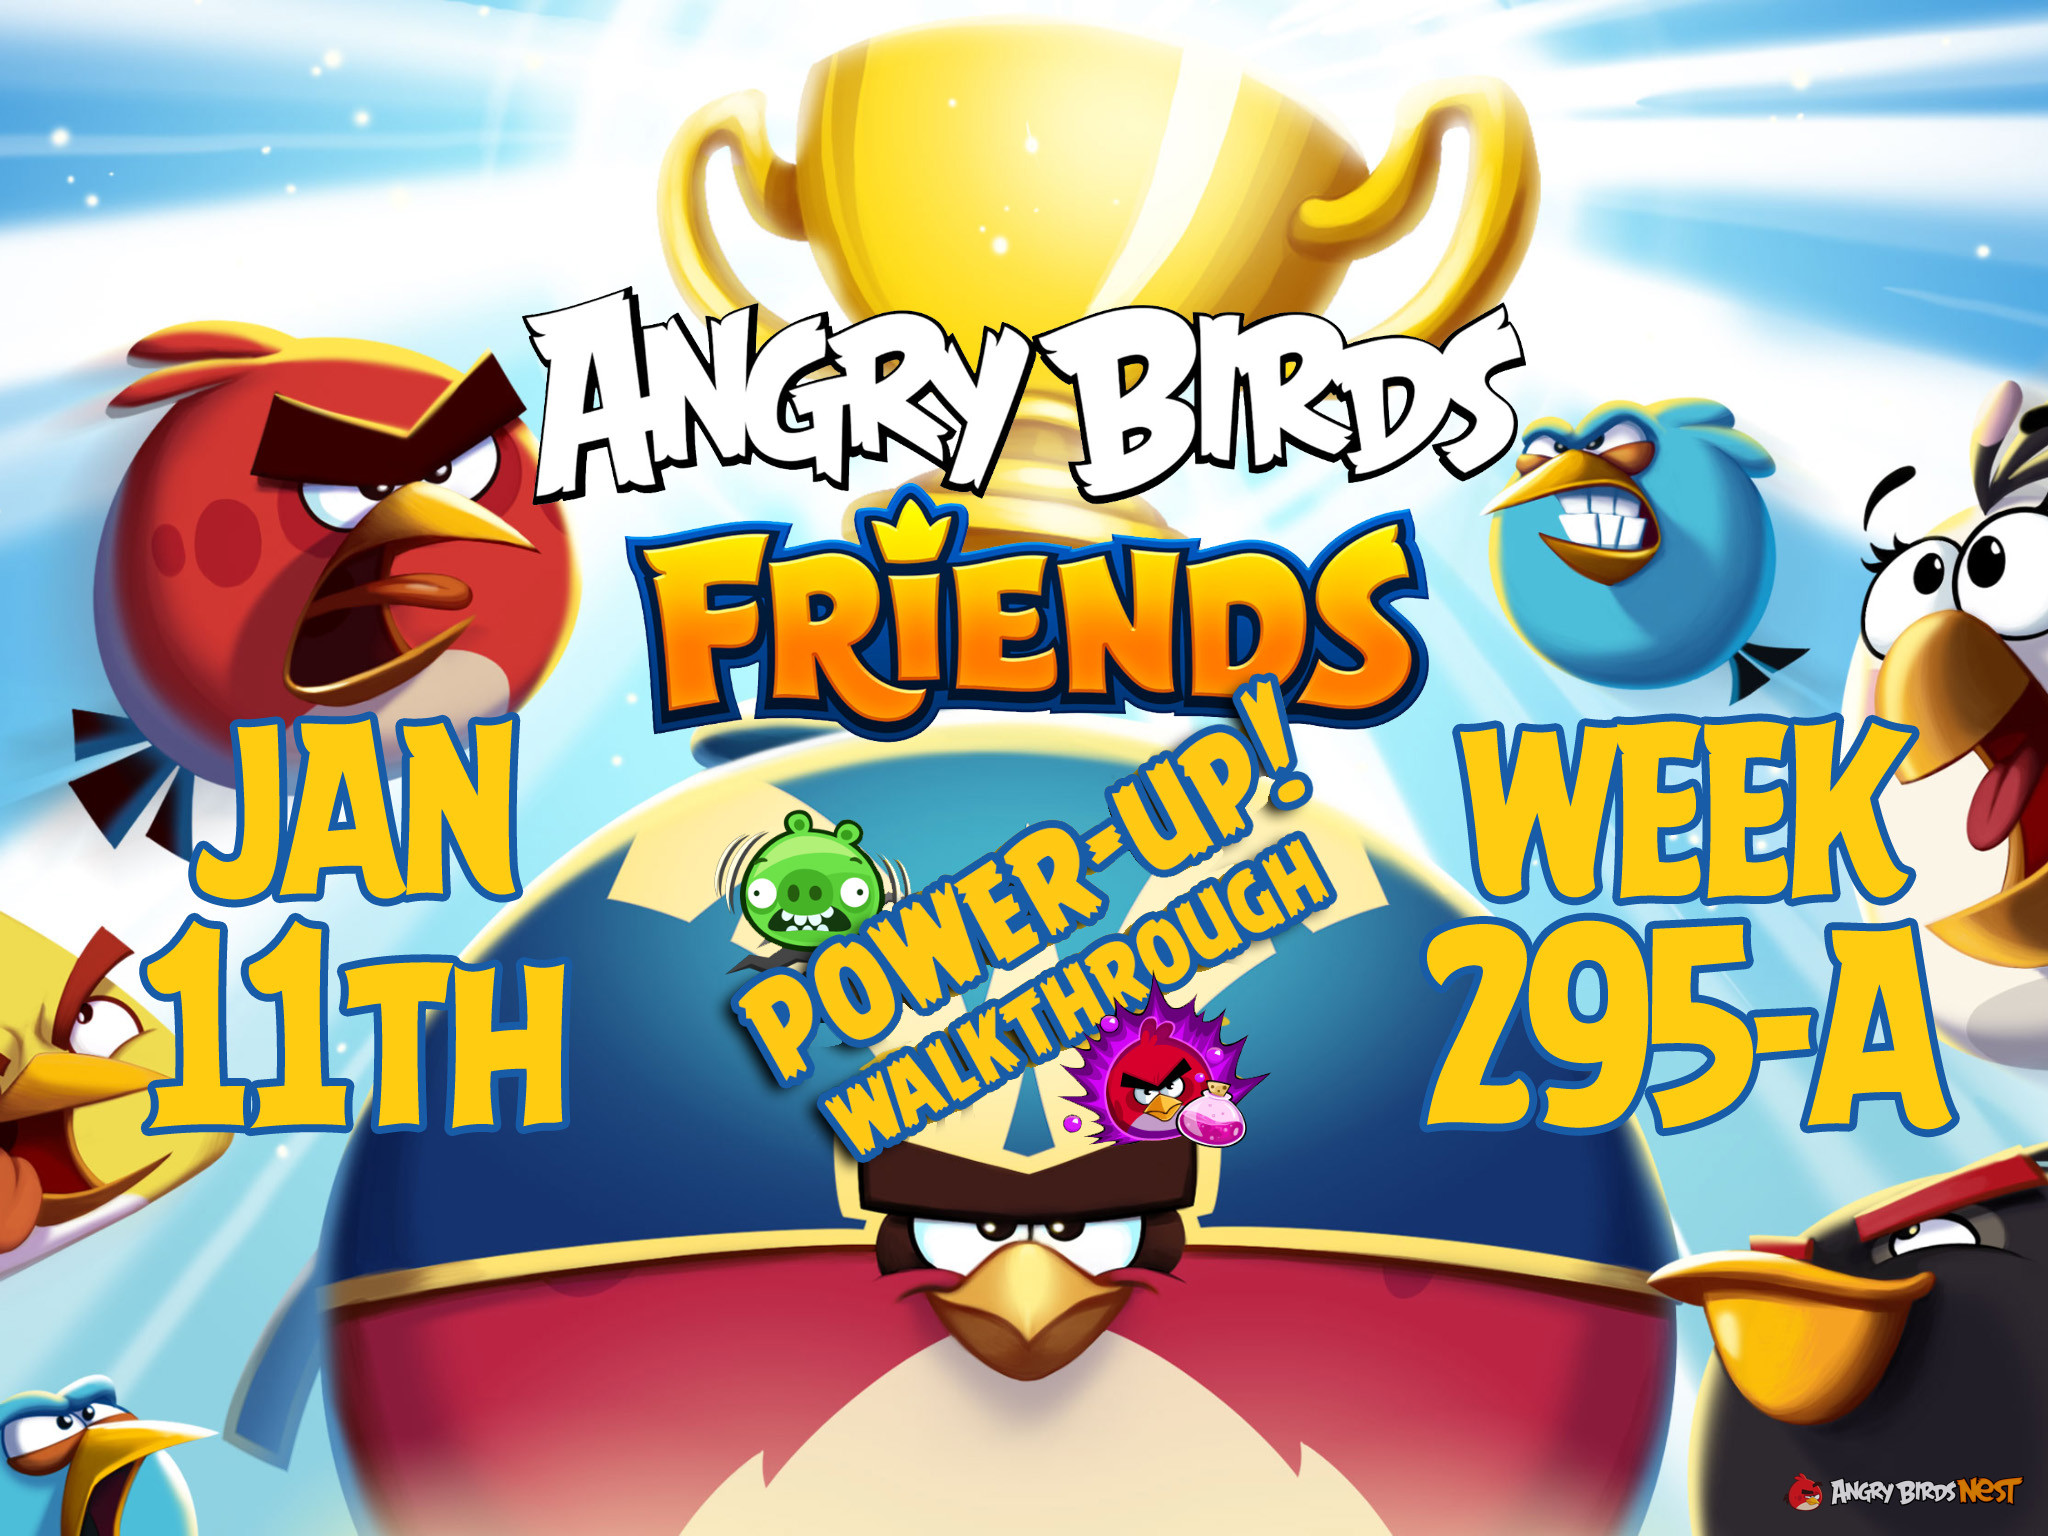 Angry Birds Friends Tournament Week 295-A Feature Image PU